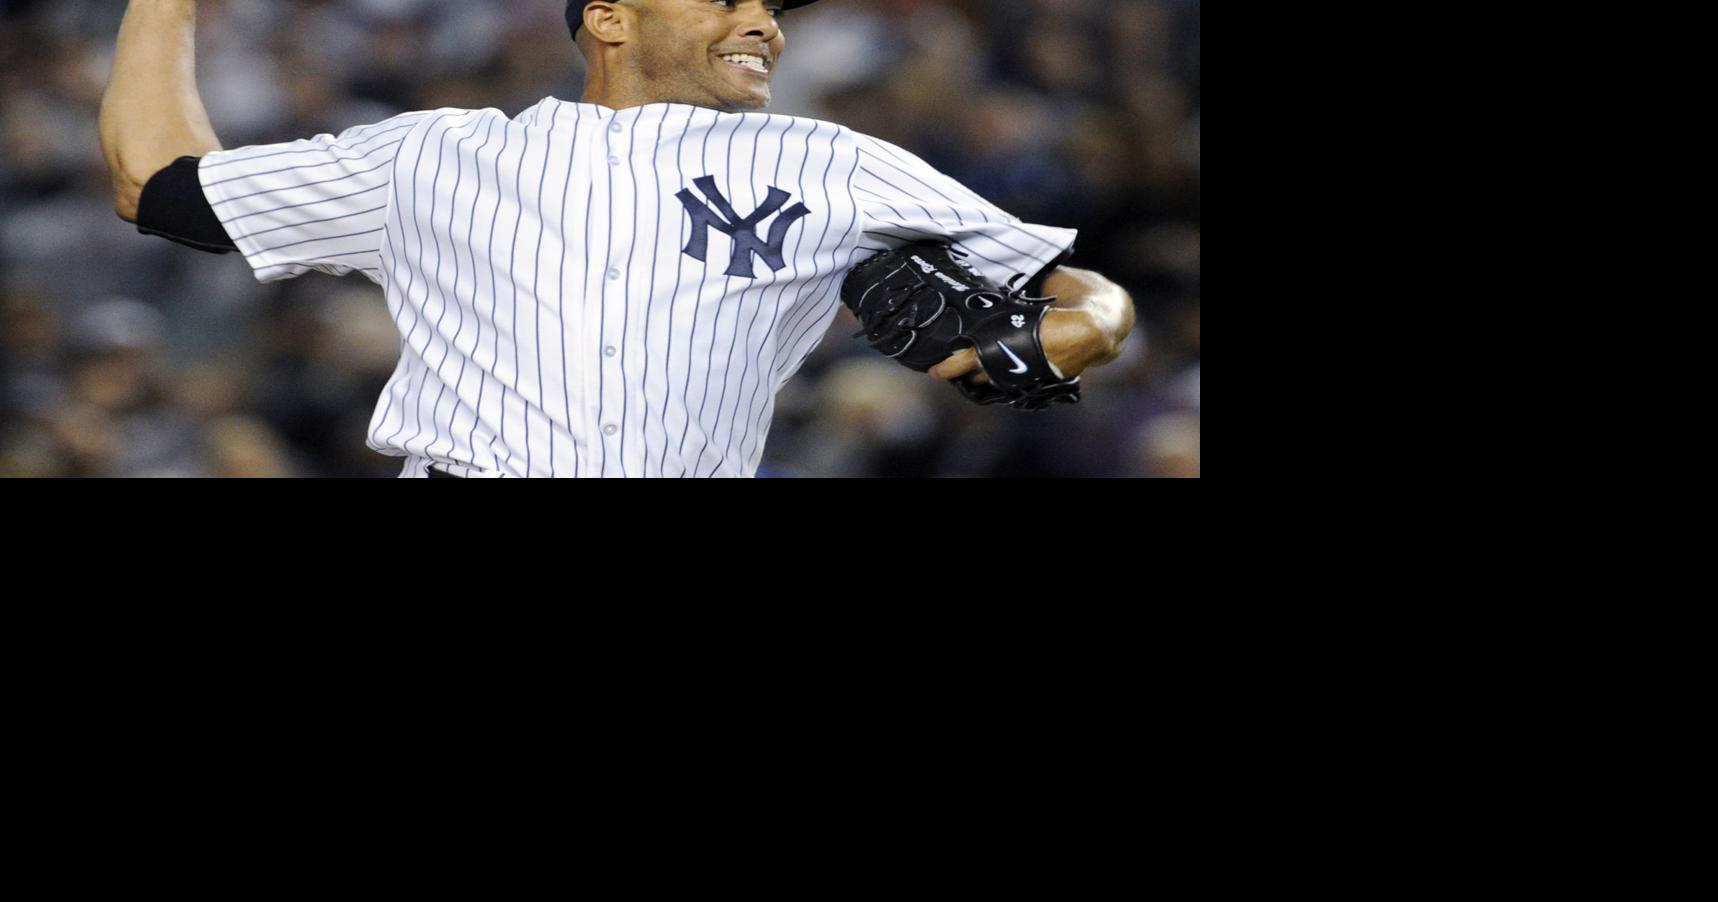 Mariano Rivera first to be unanimously elected to the Hall of Fame - Newsday